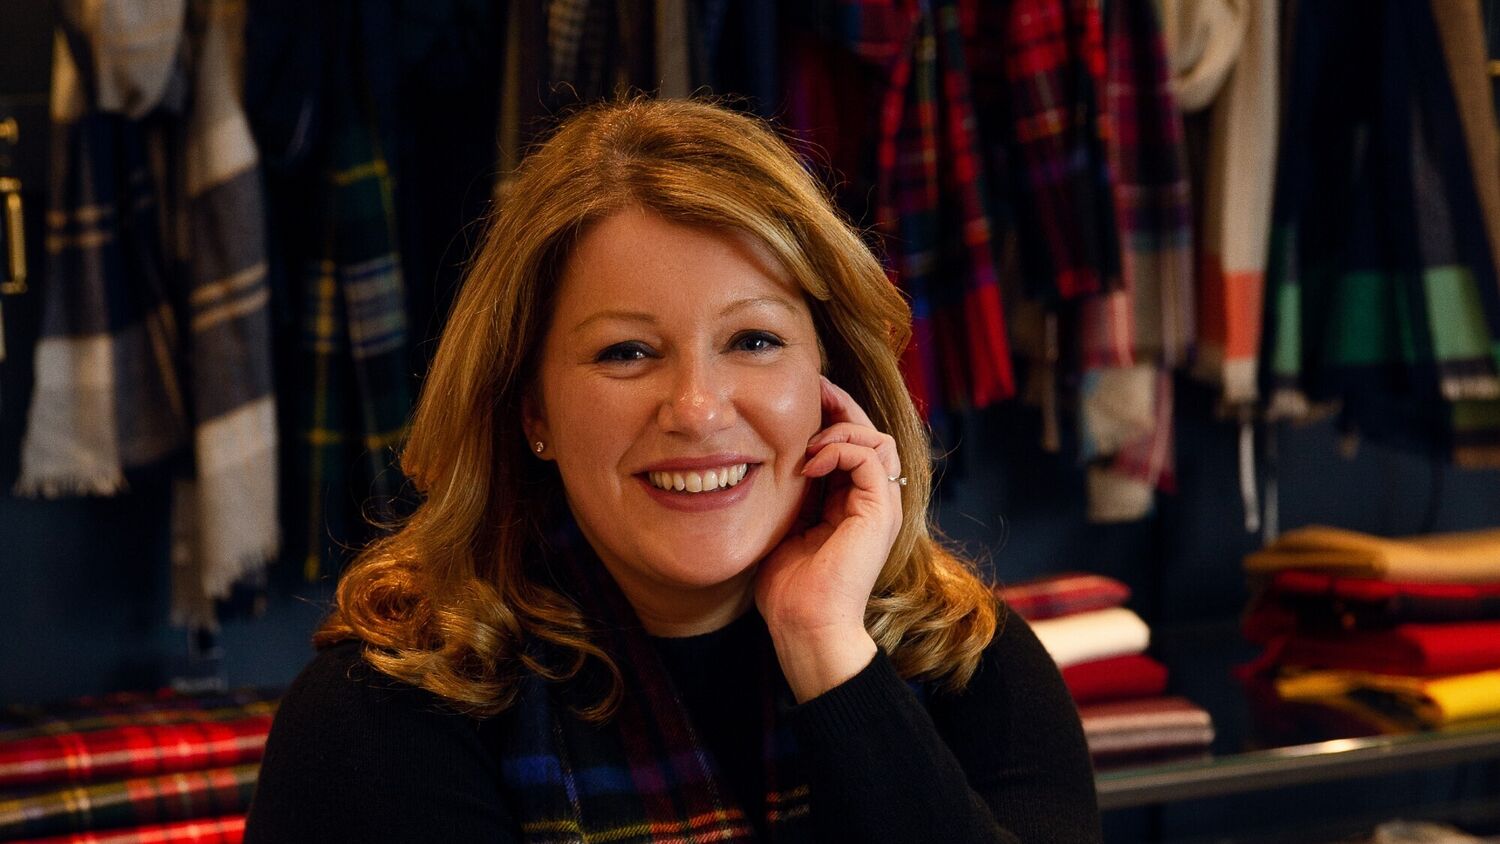 A smiling woman is sitting on a chair, wearing a tartan shawl.